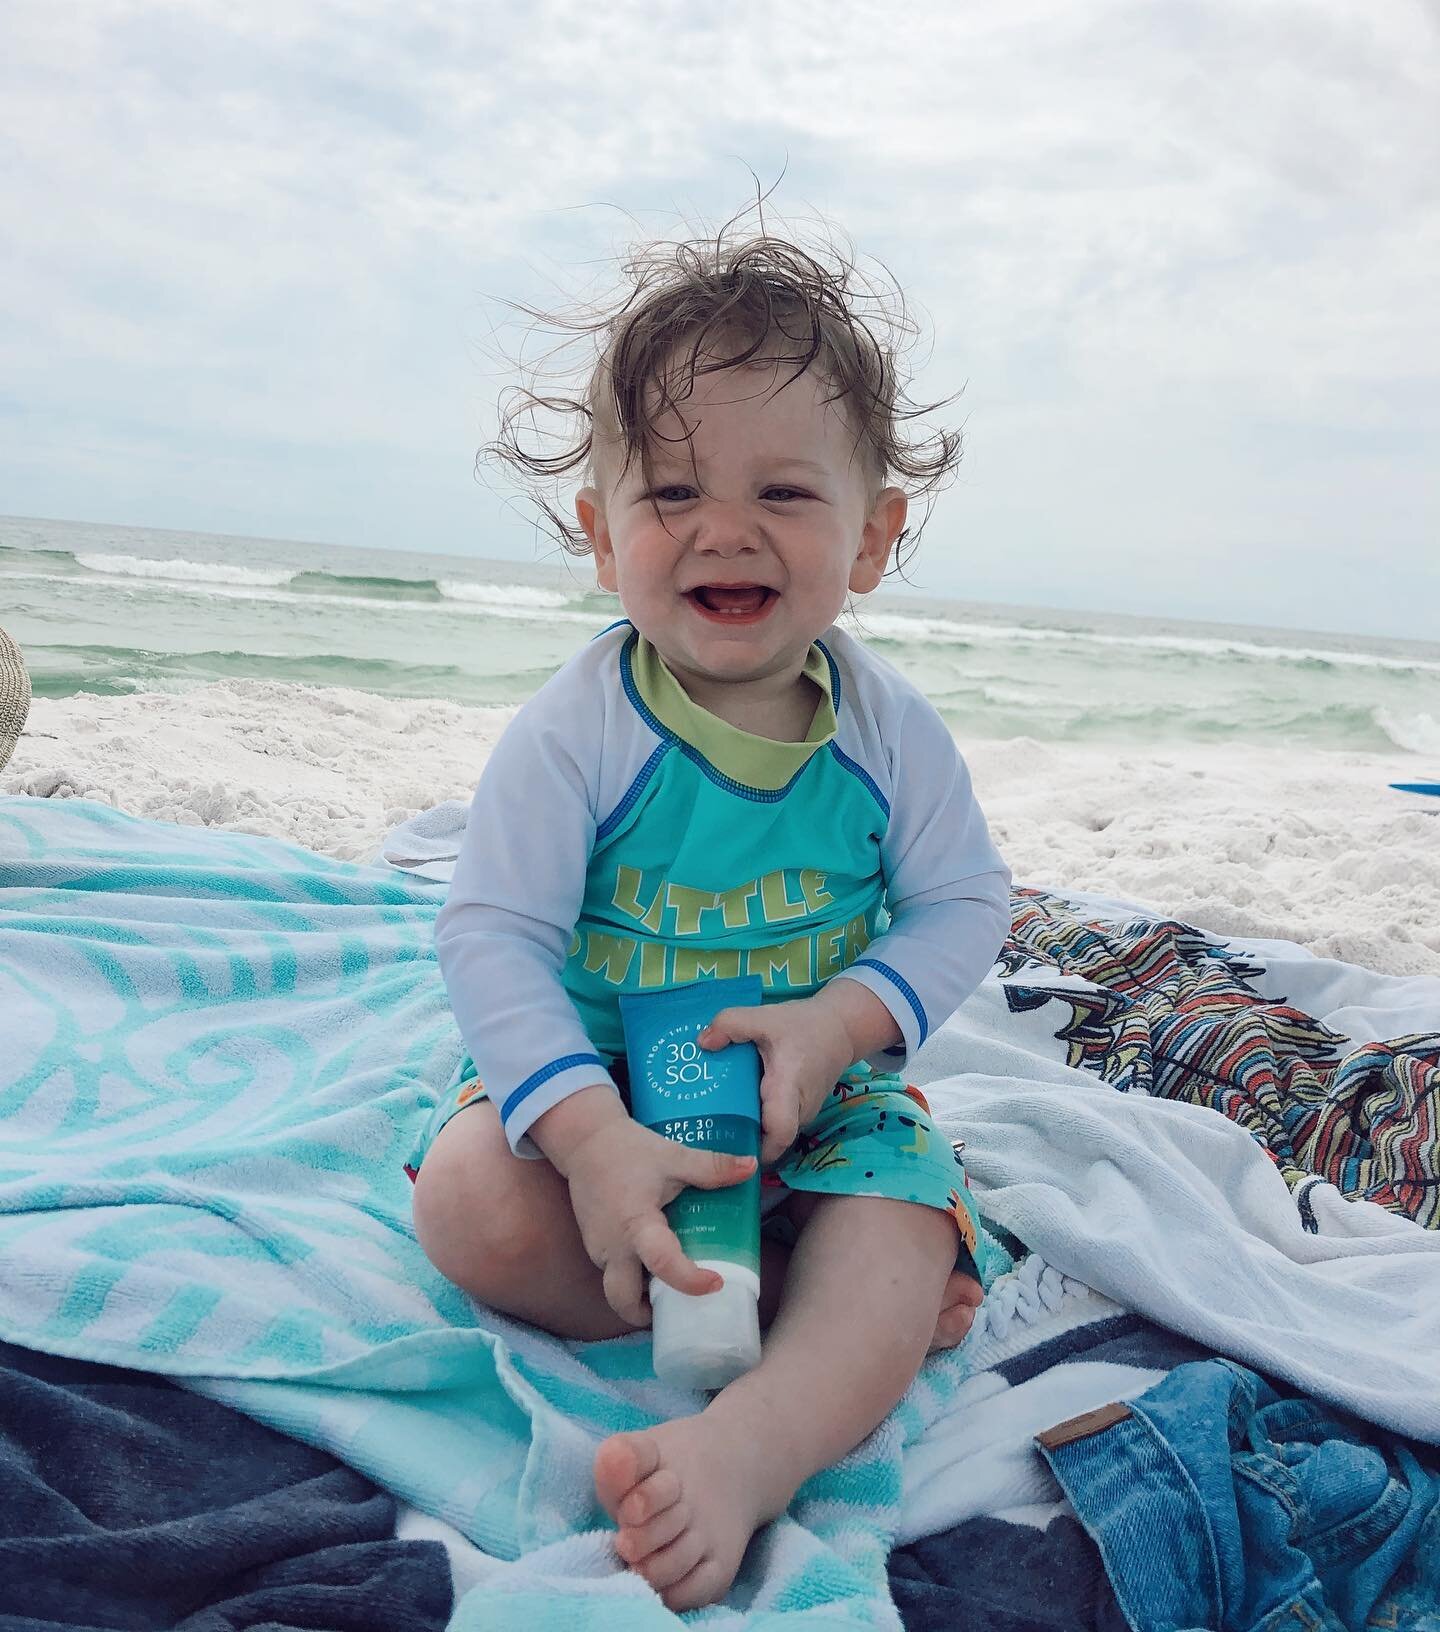 30A SOL SPF 30 is provides safe sun protection for the whole family! Even the little ones! ☀️

.
.
.
.
.
.
.
#travel #traveling #socialsteeze #vacation #visiting #instatravel #instago #instagood #trip #30A #photooftheday #fun #travelling #tourism #to